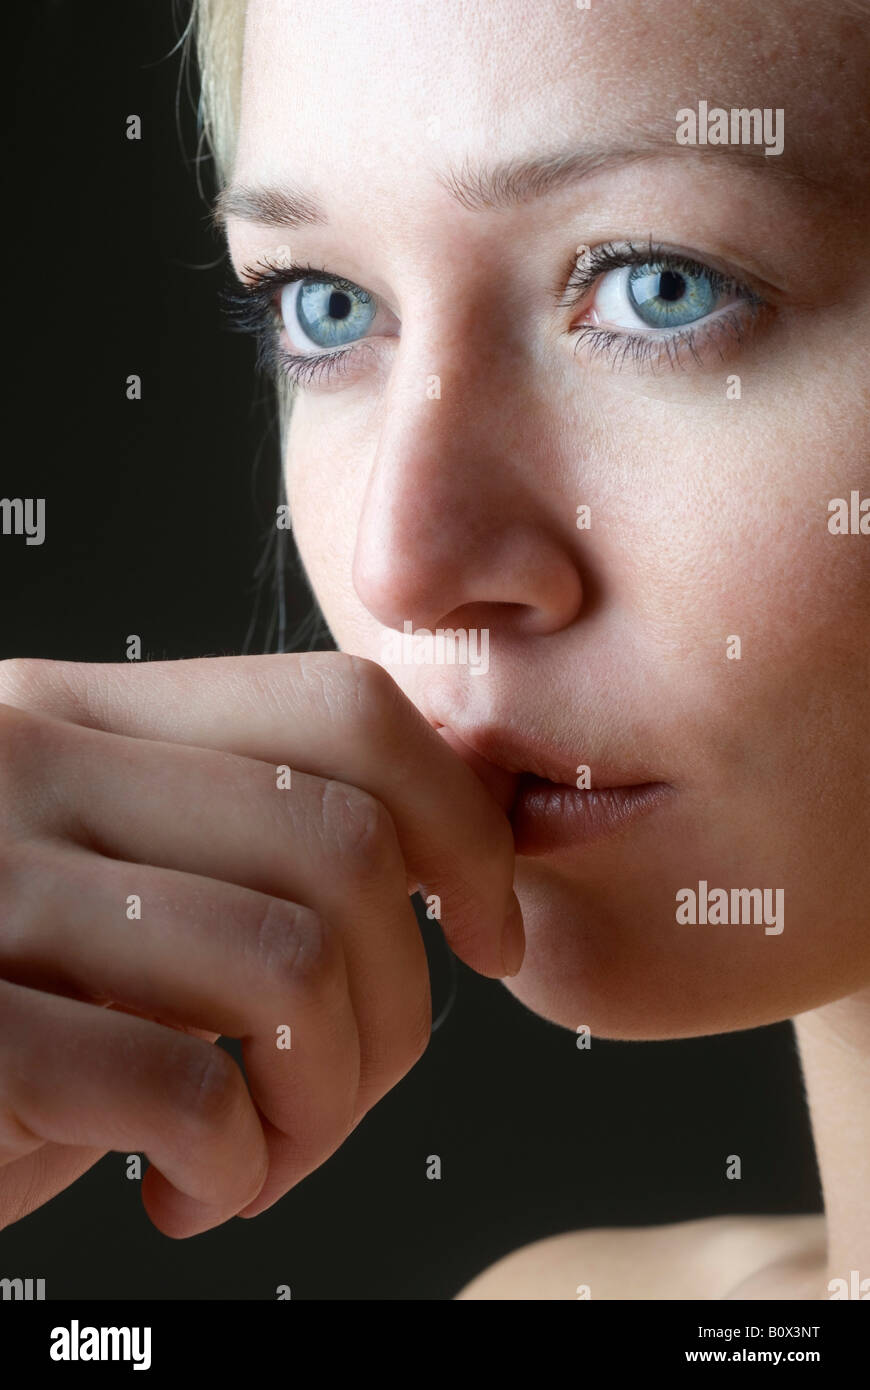 Close up of a woman biting her nail Stock Photo